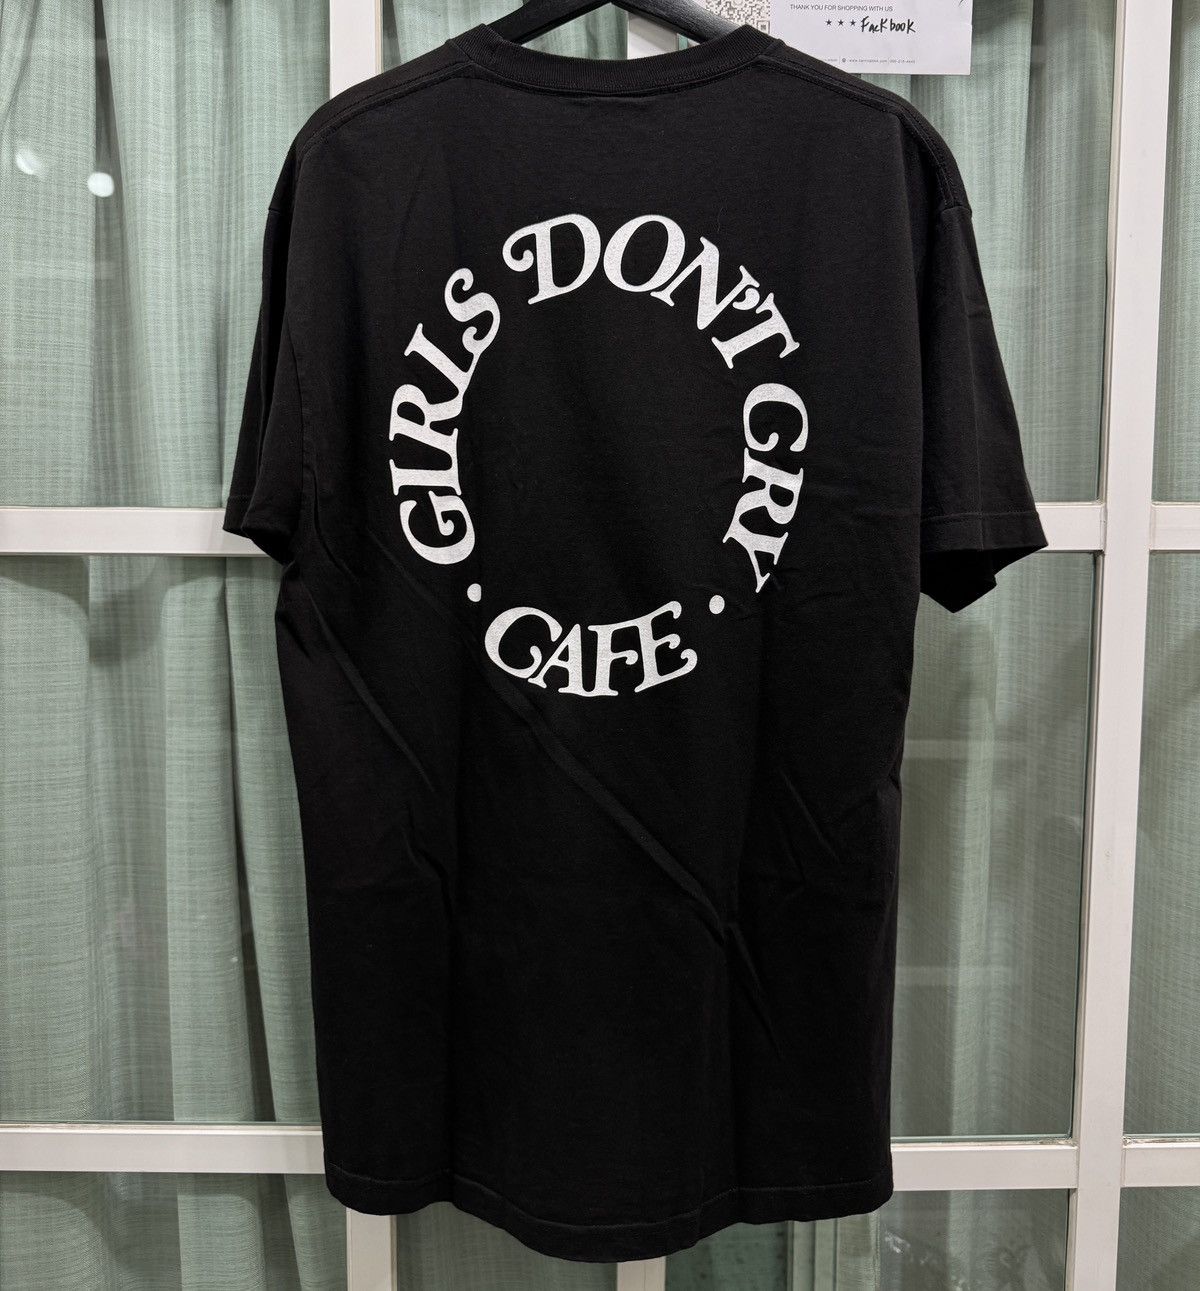 Girls Dont Cry × Human Made | Grailed